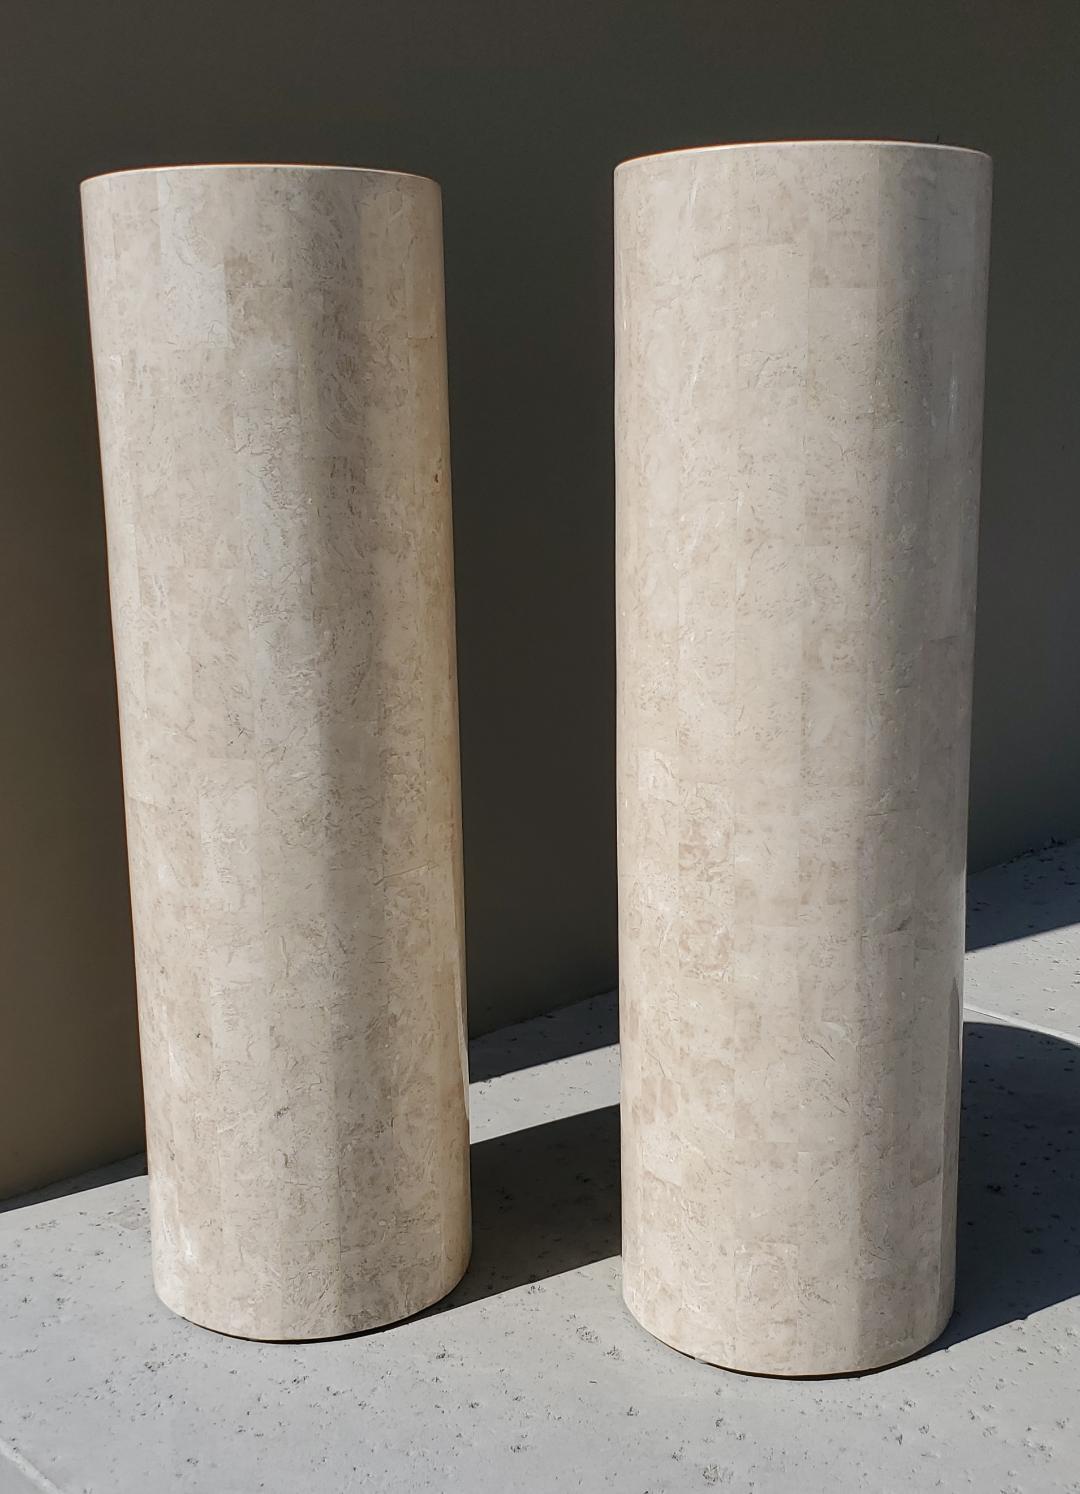 Marquis Collection of Beverly Hills, 1980s Round Tessellated Stone Pedestals 2 3